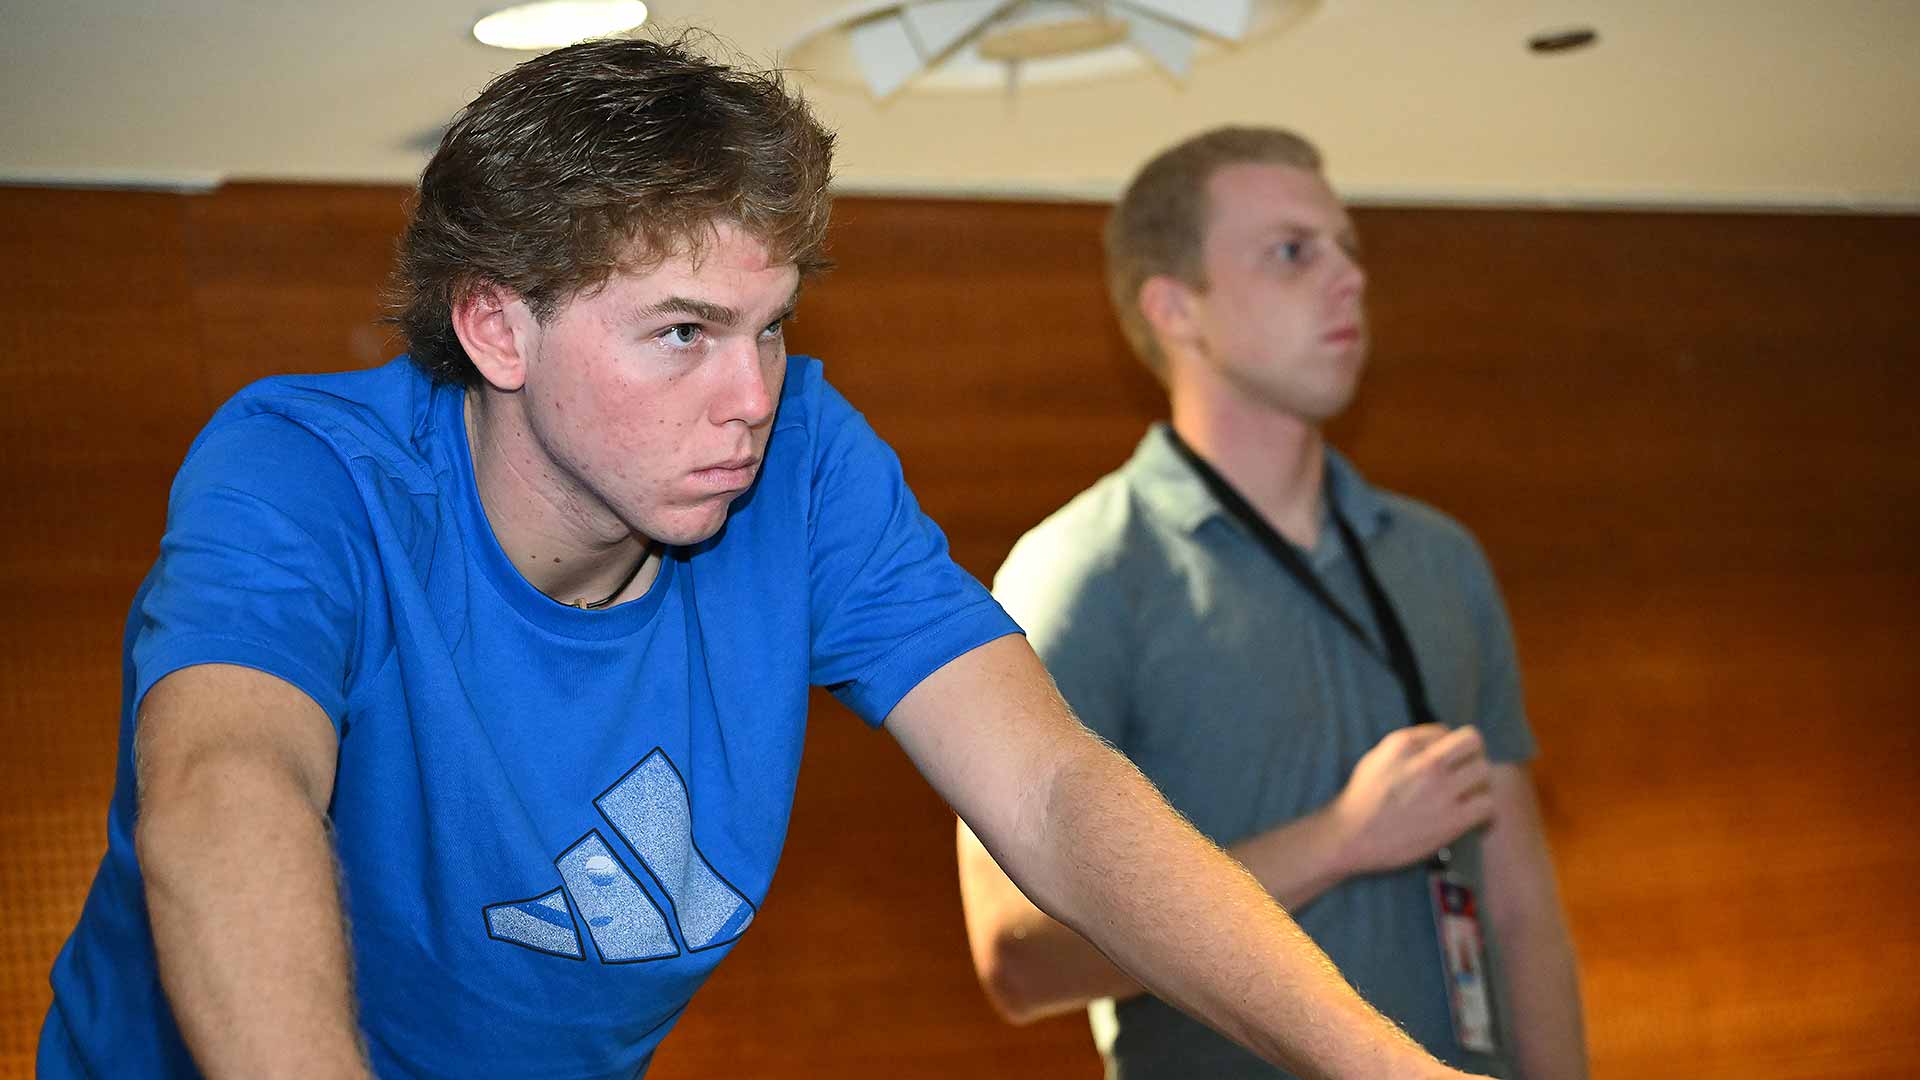 <a href='https://www.atptour.com/en/players/alex-michelsen/m0qi/overview'>Alex Michelsen</a> takes in a briefing on rules and innovation on display in Jeddah.